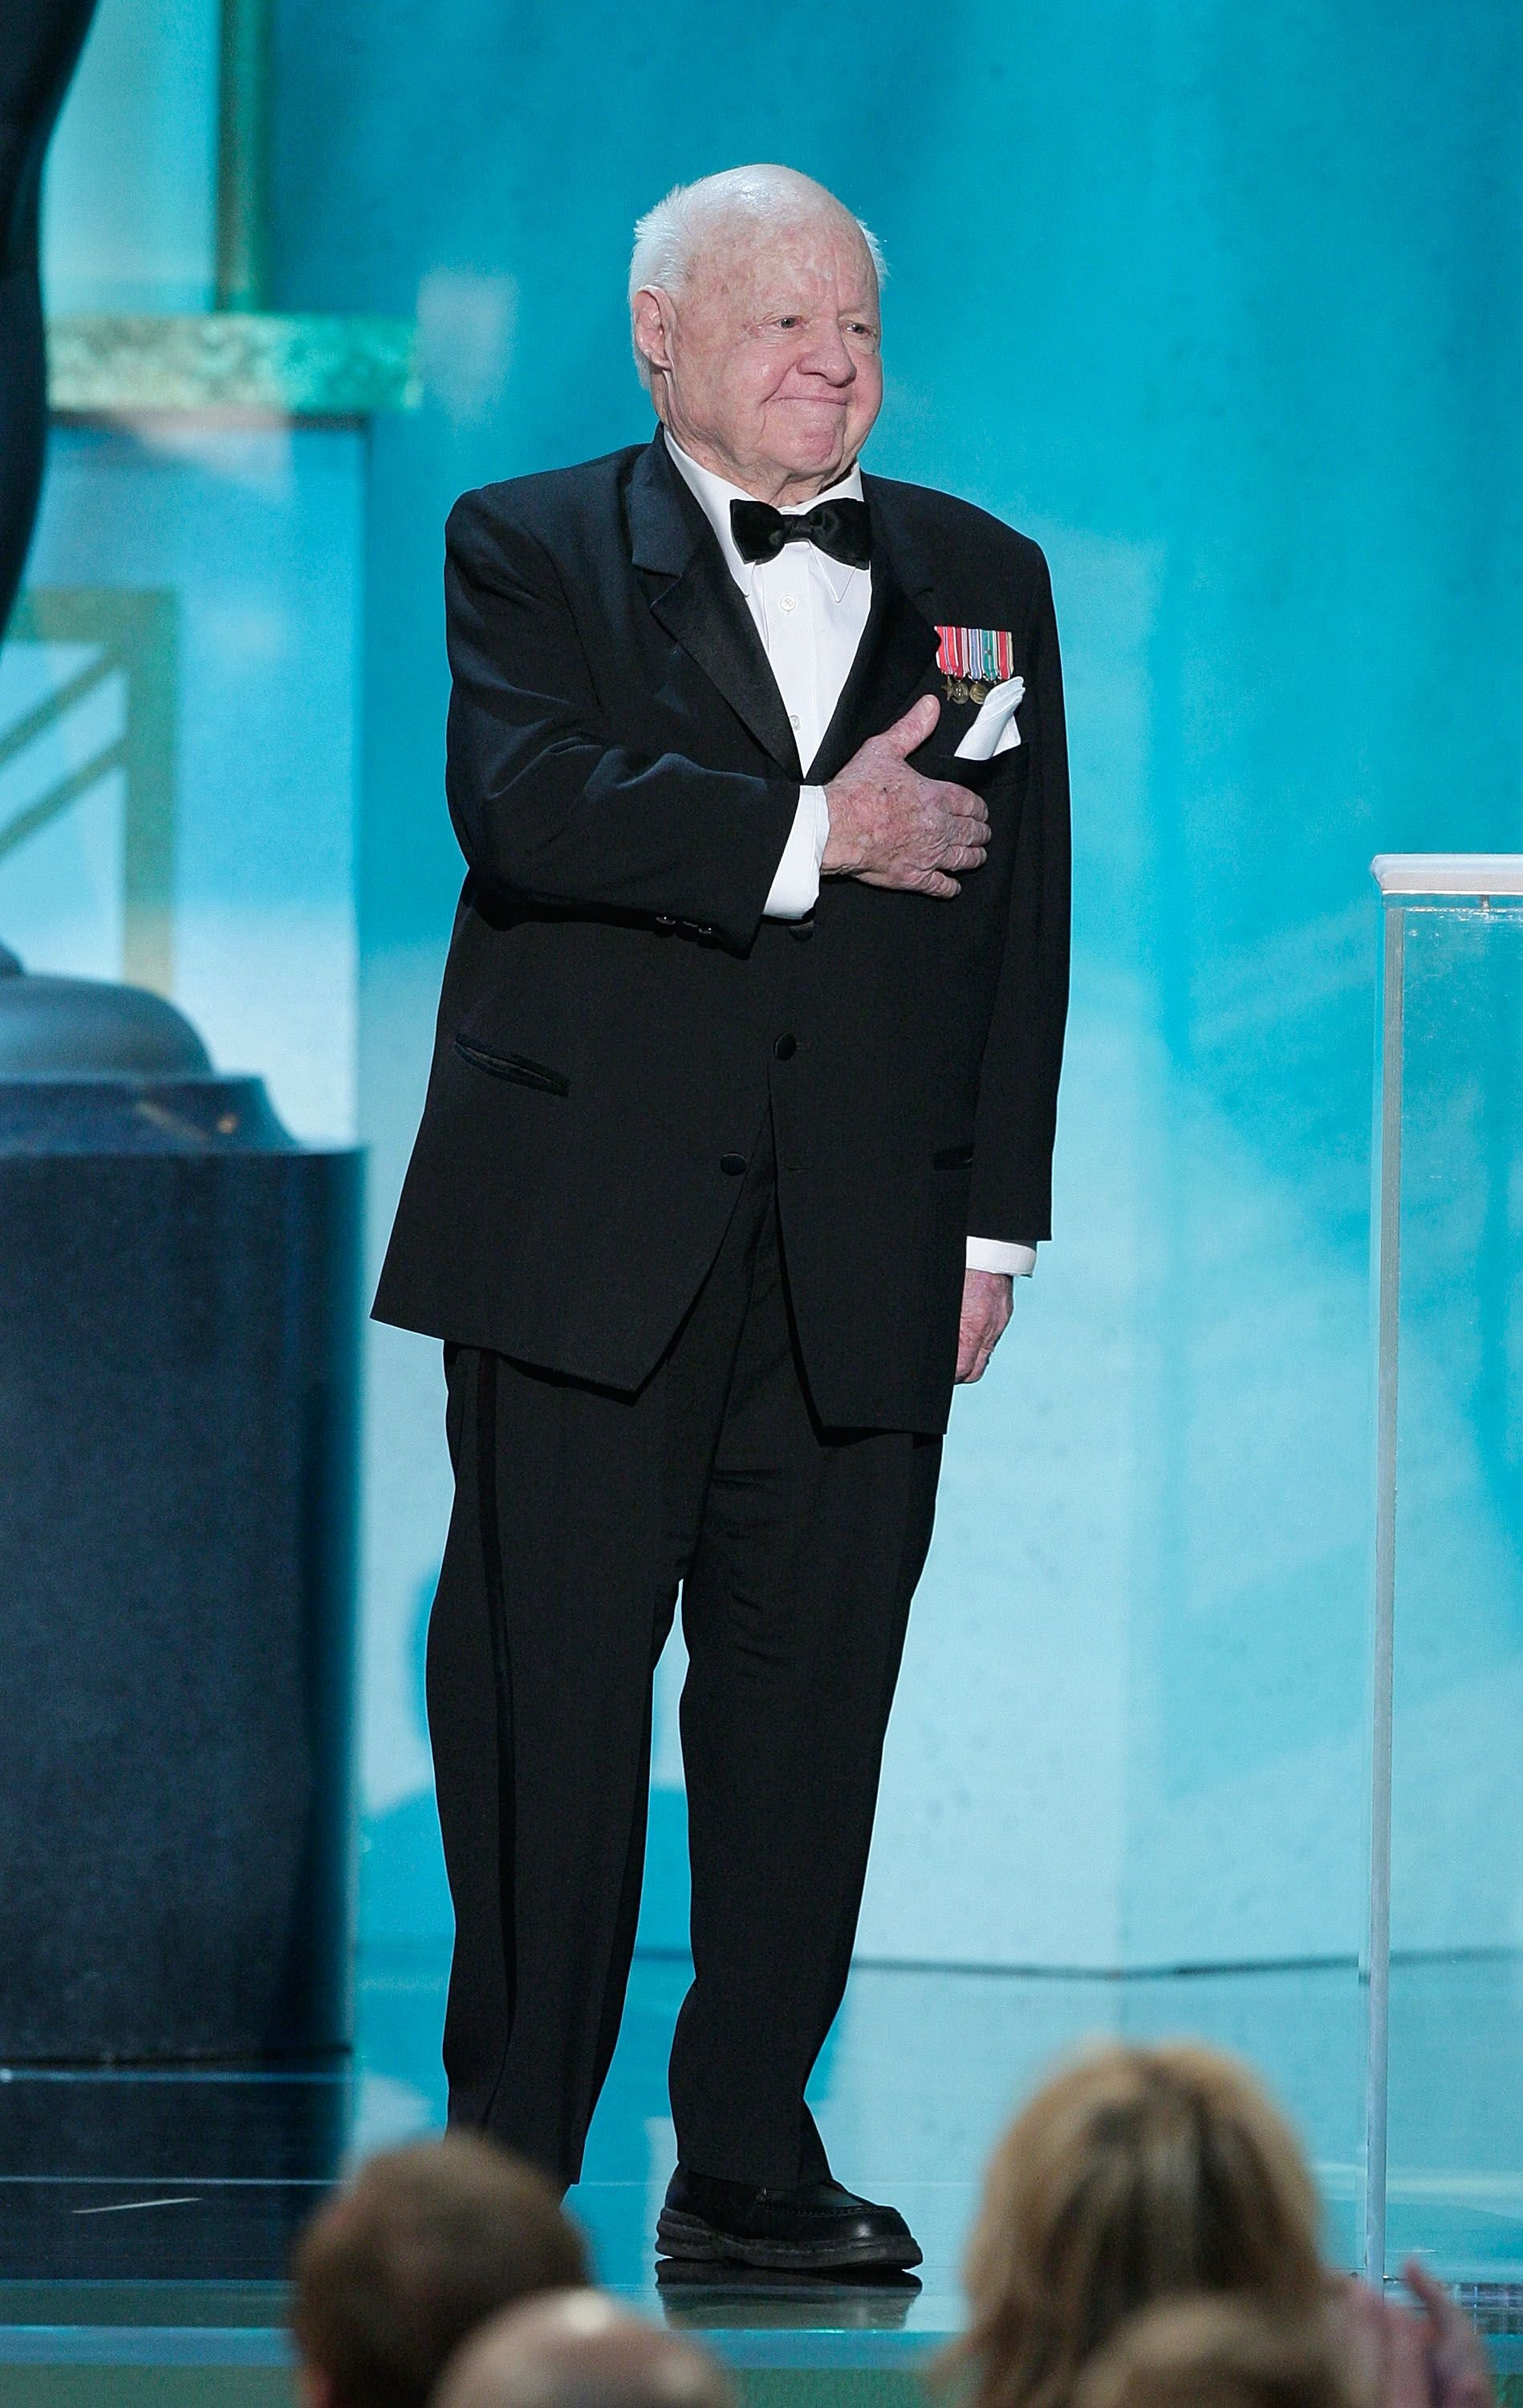 Mickey Rooney during the 14th annual Screen Actors Guild Awards on January 27, 2008, in Los Angeles, California | Photo: Kevin Winter/Getty Images